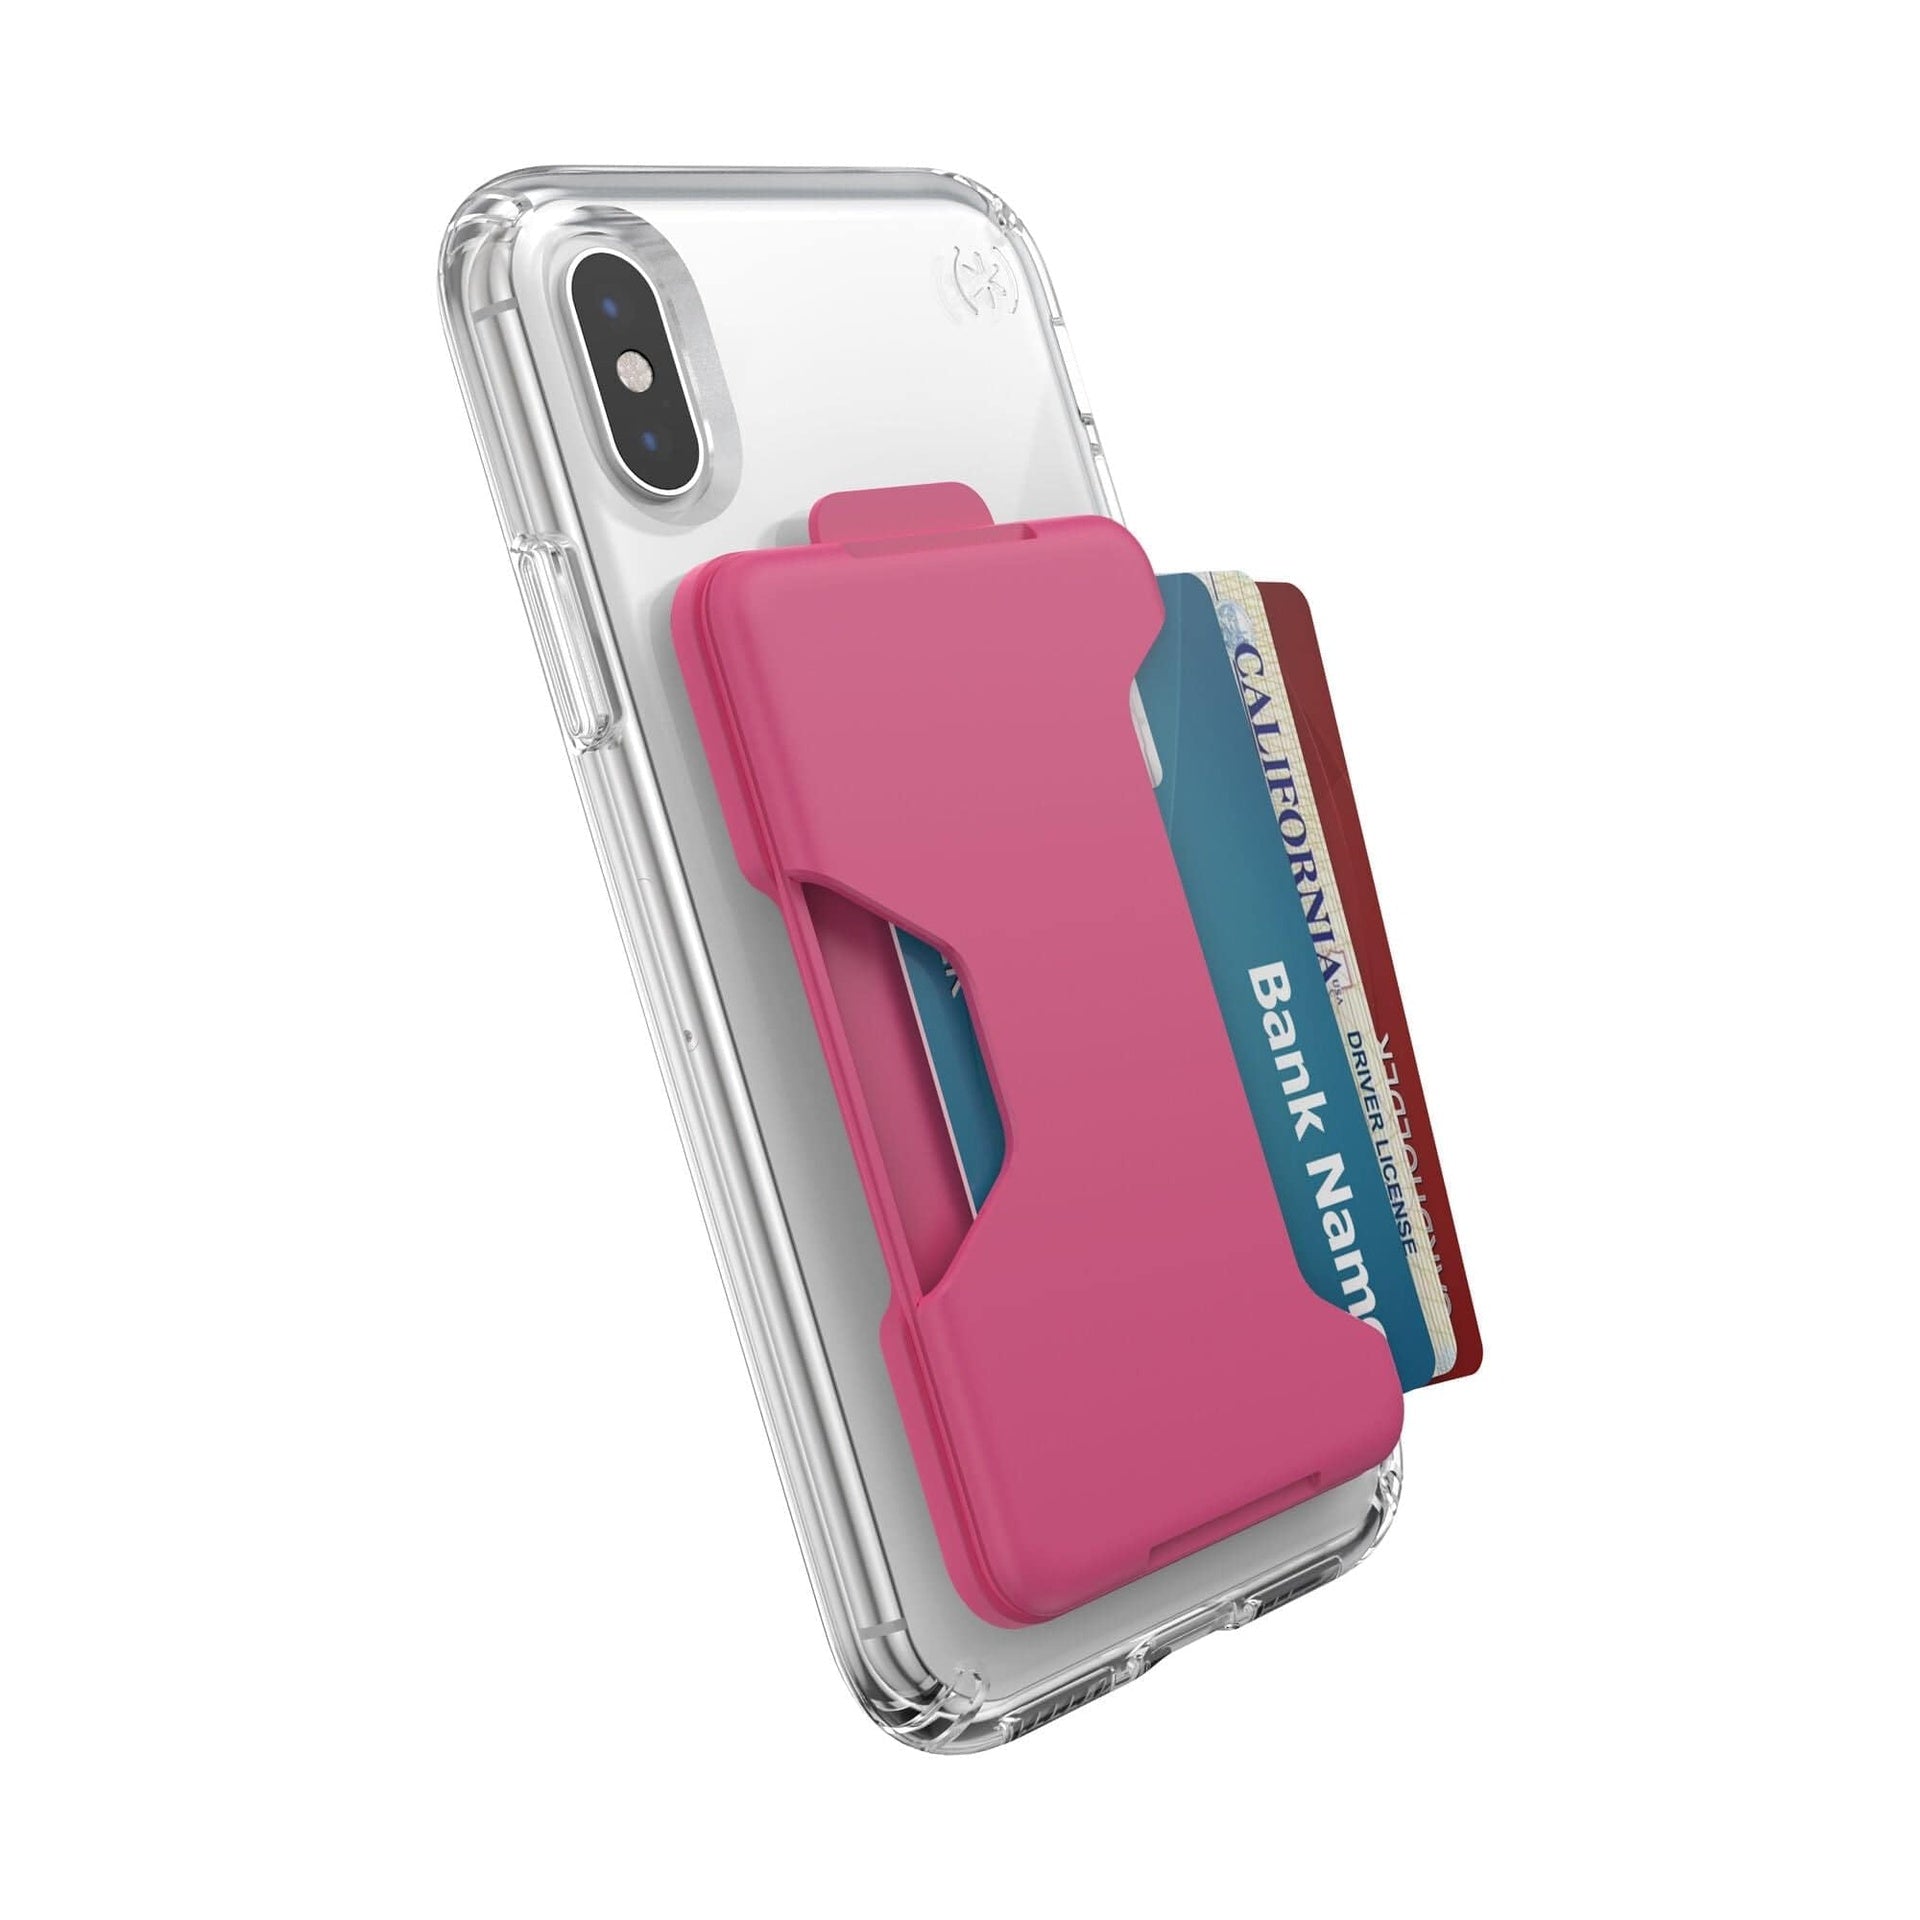 Speck Products Universal Phone Case Lootlock Stick-On Wallet, Guava Pink